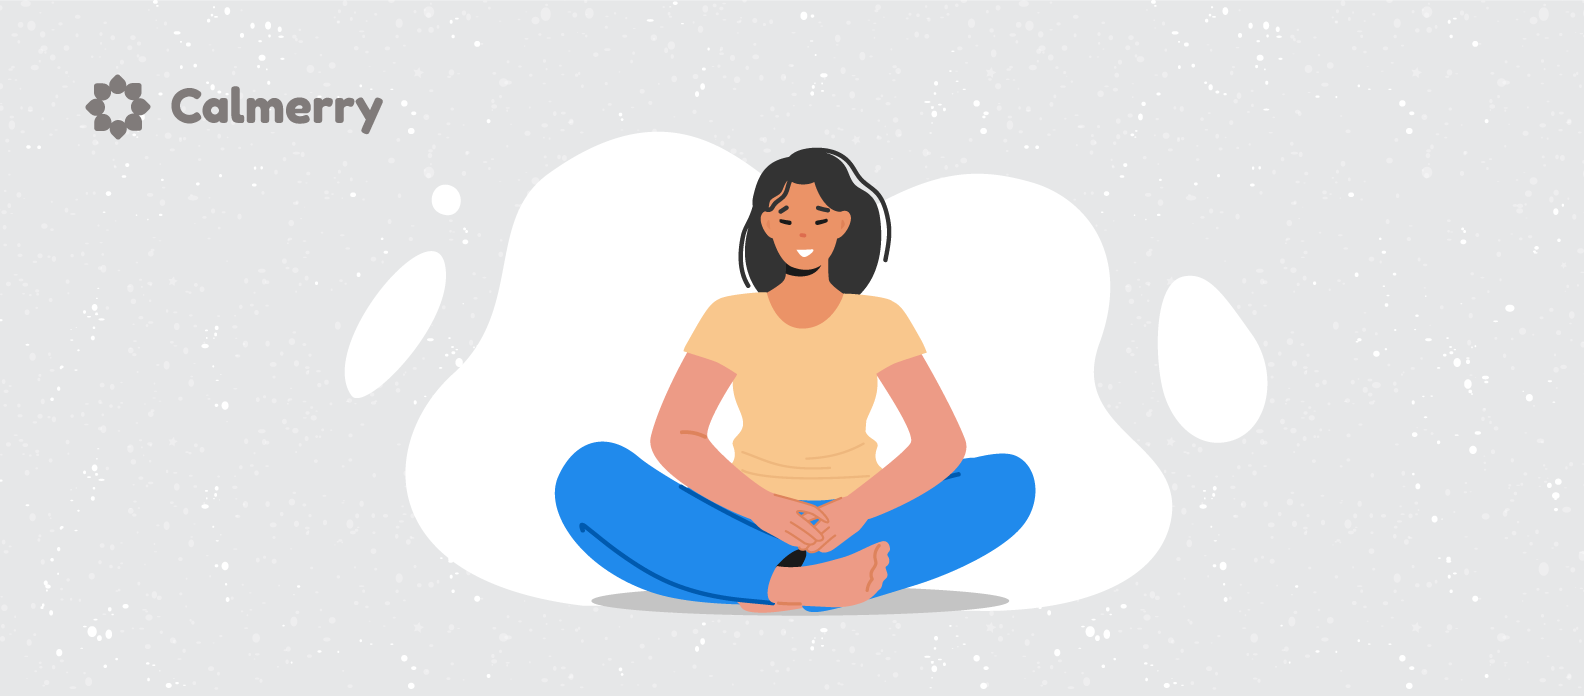 A calm person practicing meditation to relieve social anxiety 